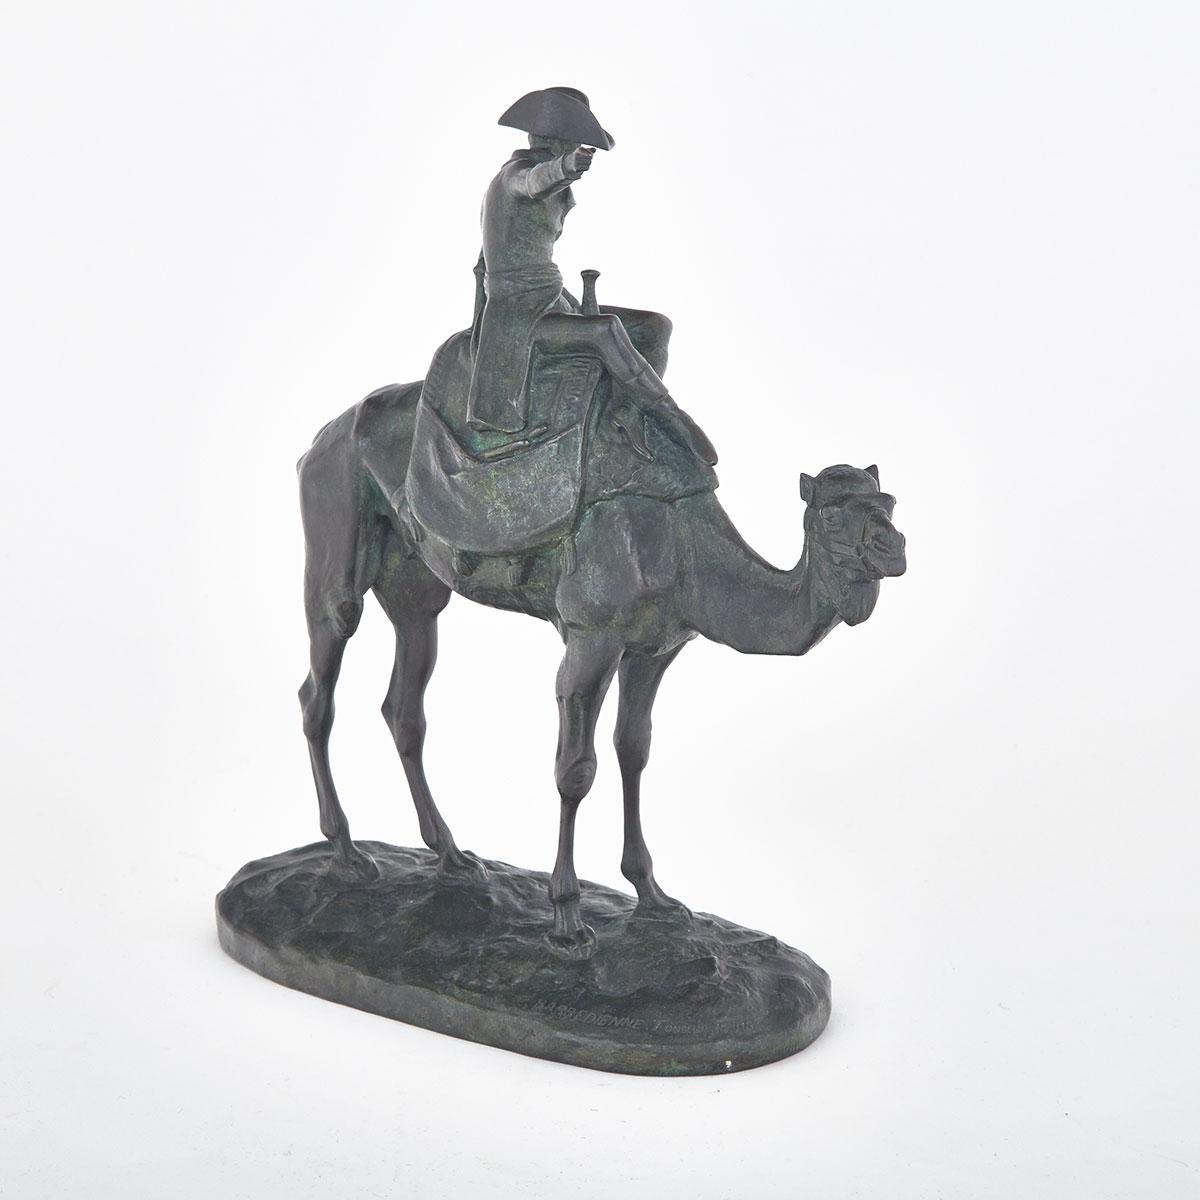 French Patinated Bronze Group of Napoleon on a Camel by Alfred Jacquemart (1824-1896), 19th century